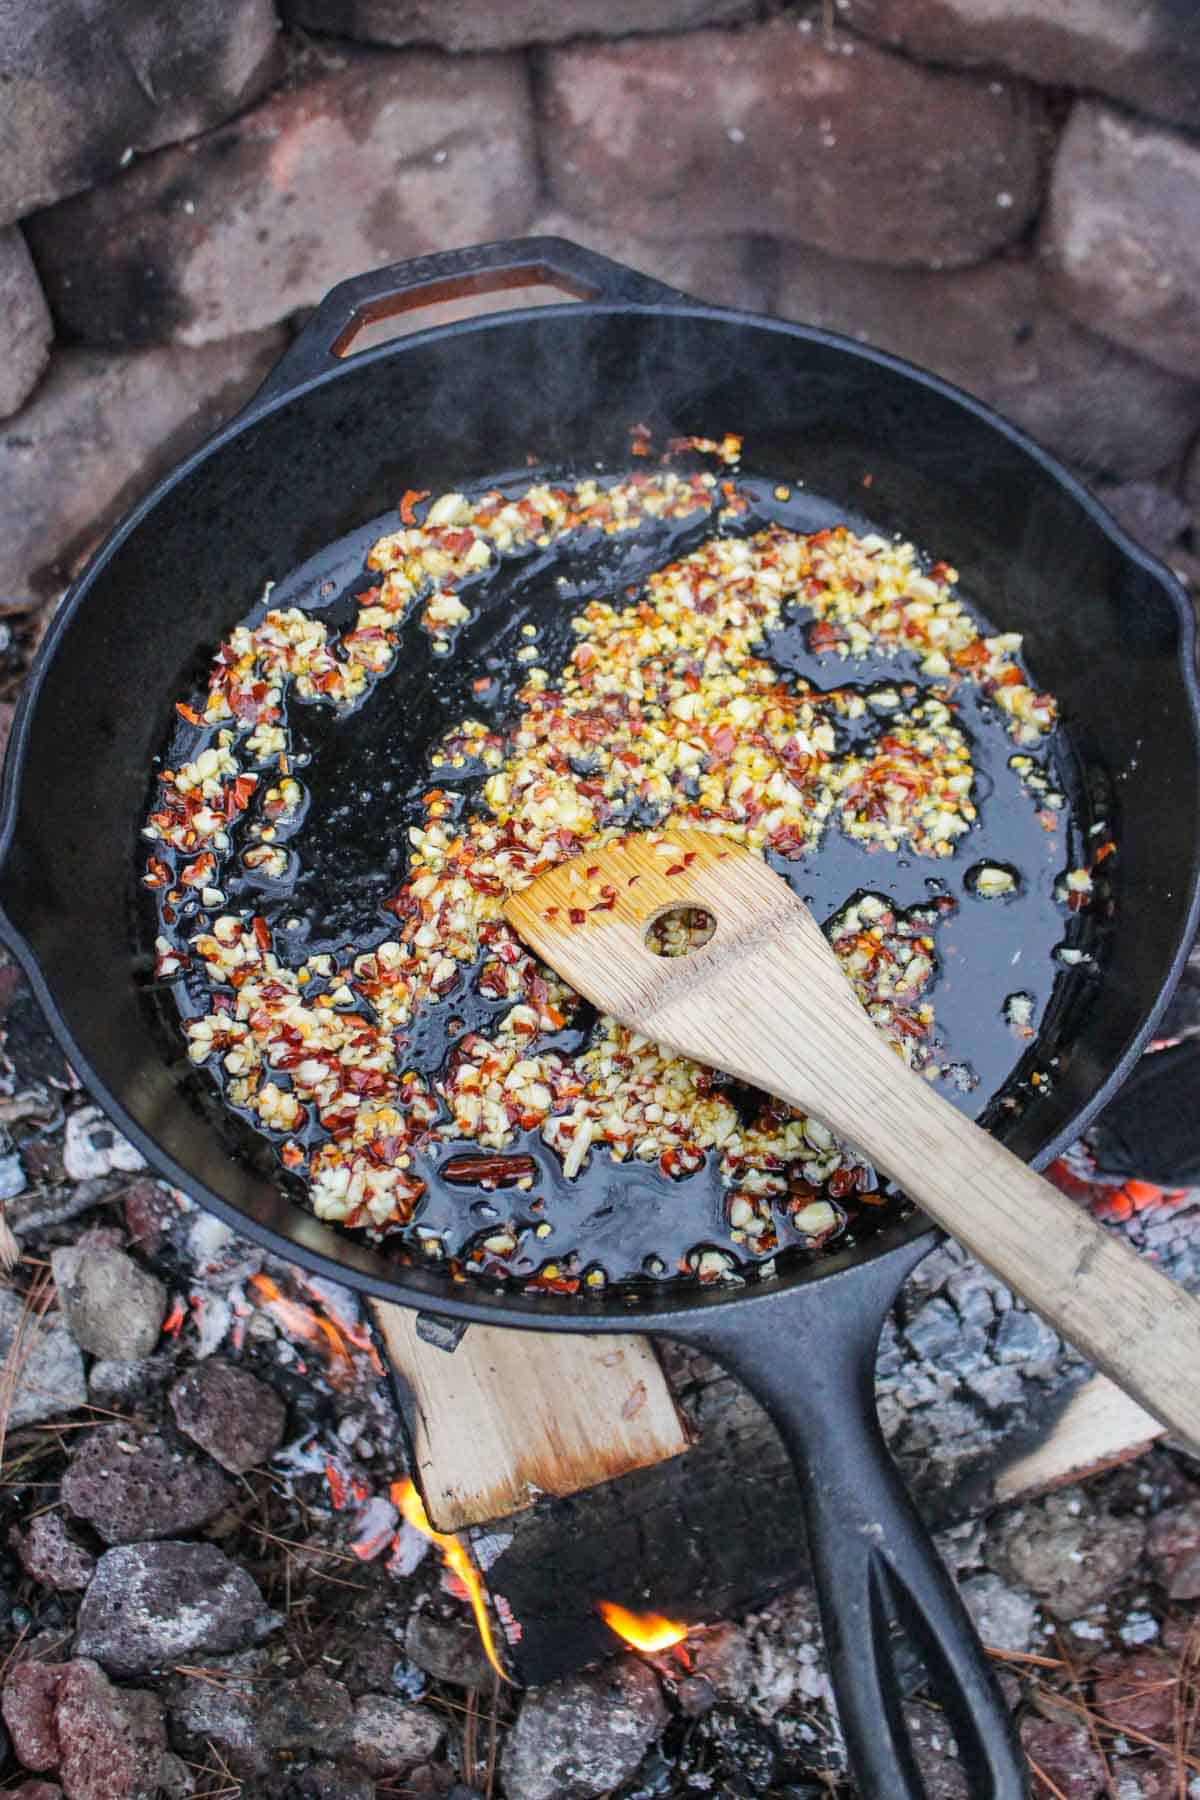 The garlic and red chili flakes browning in oil within the skillet.